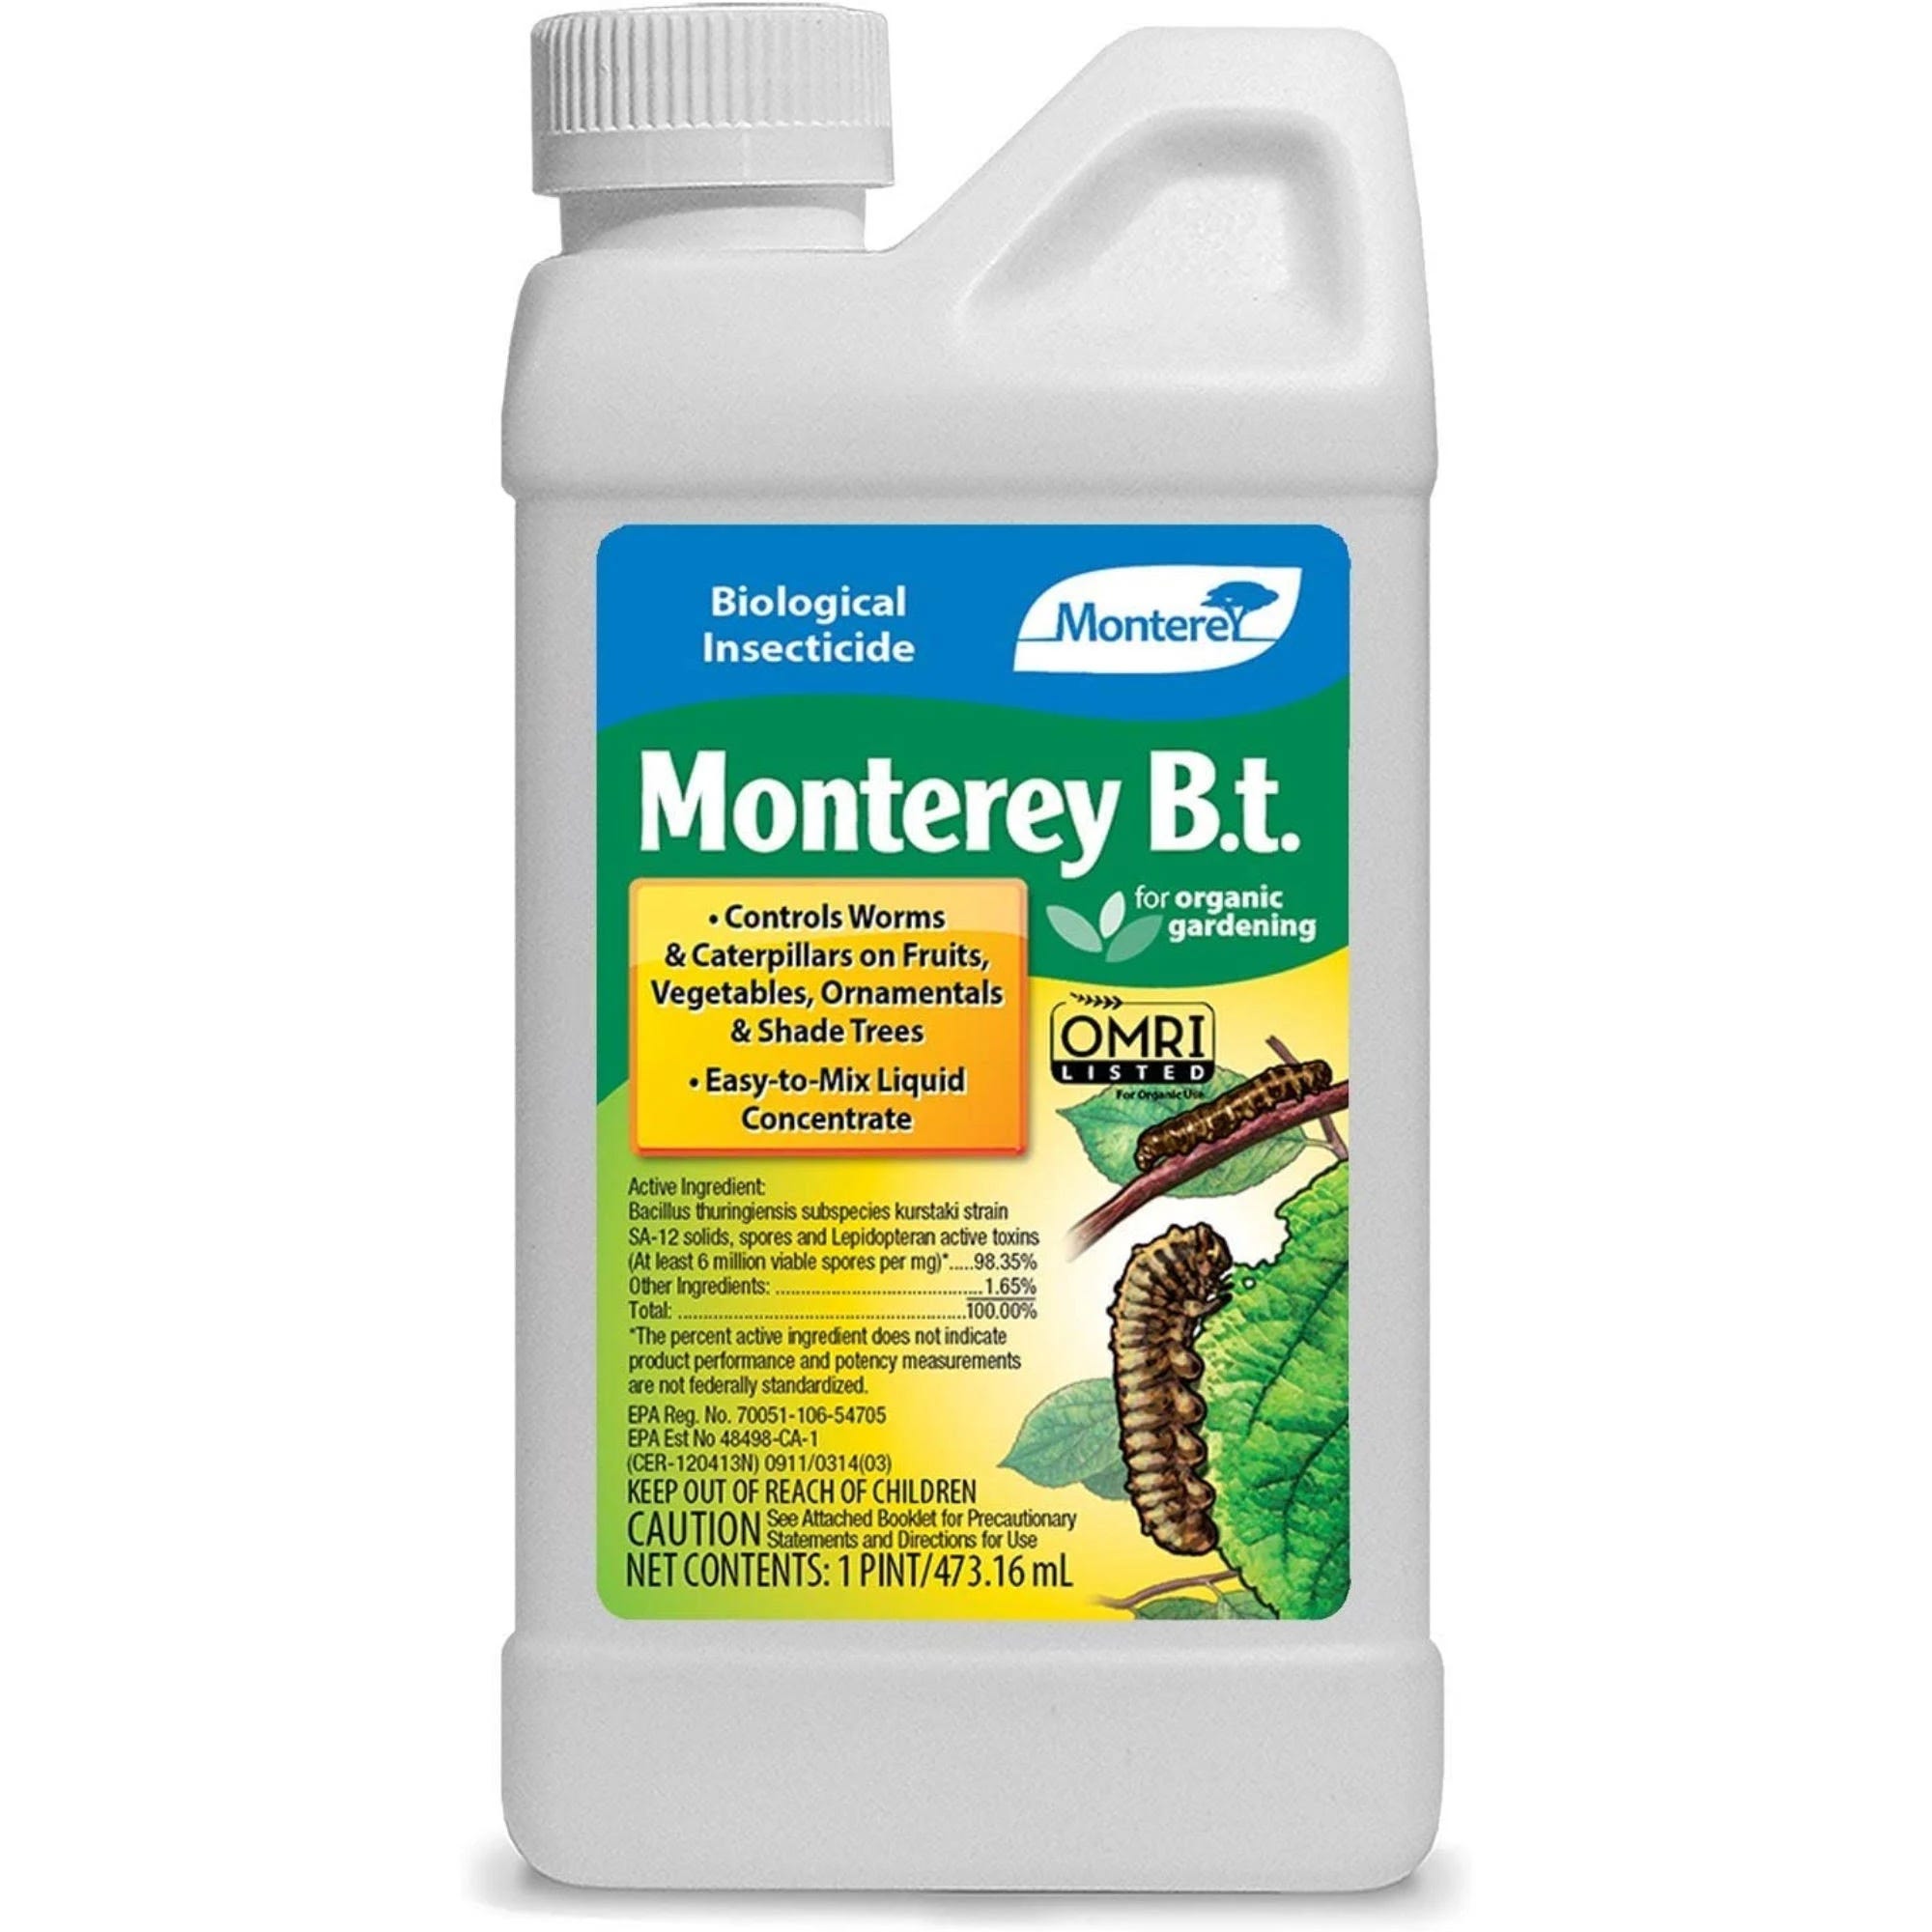 Monterey B.T. Worm & Caterpillar Control | Easy-to-Mix Liquid Concentrate | Organic Gardening Approved | Image